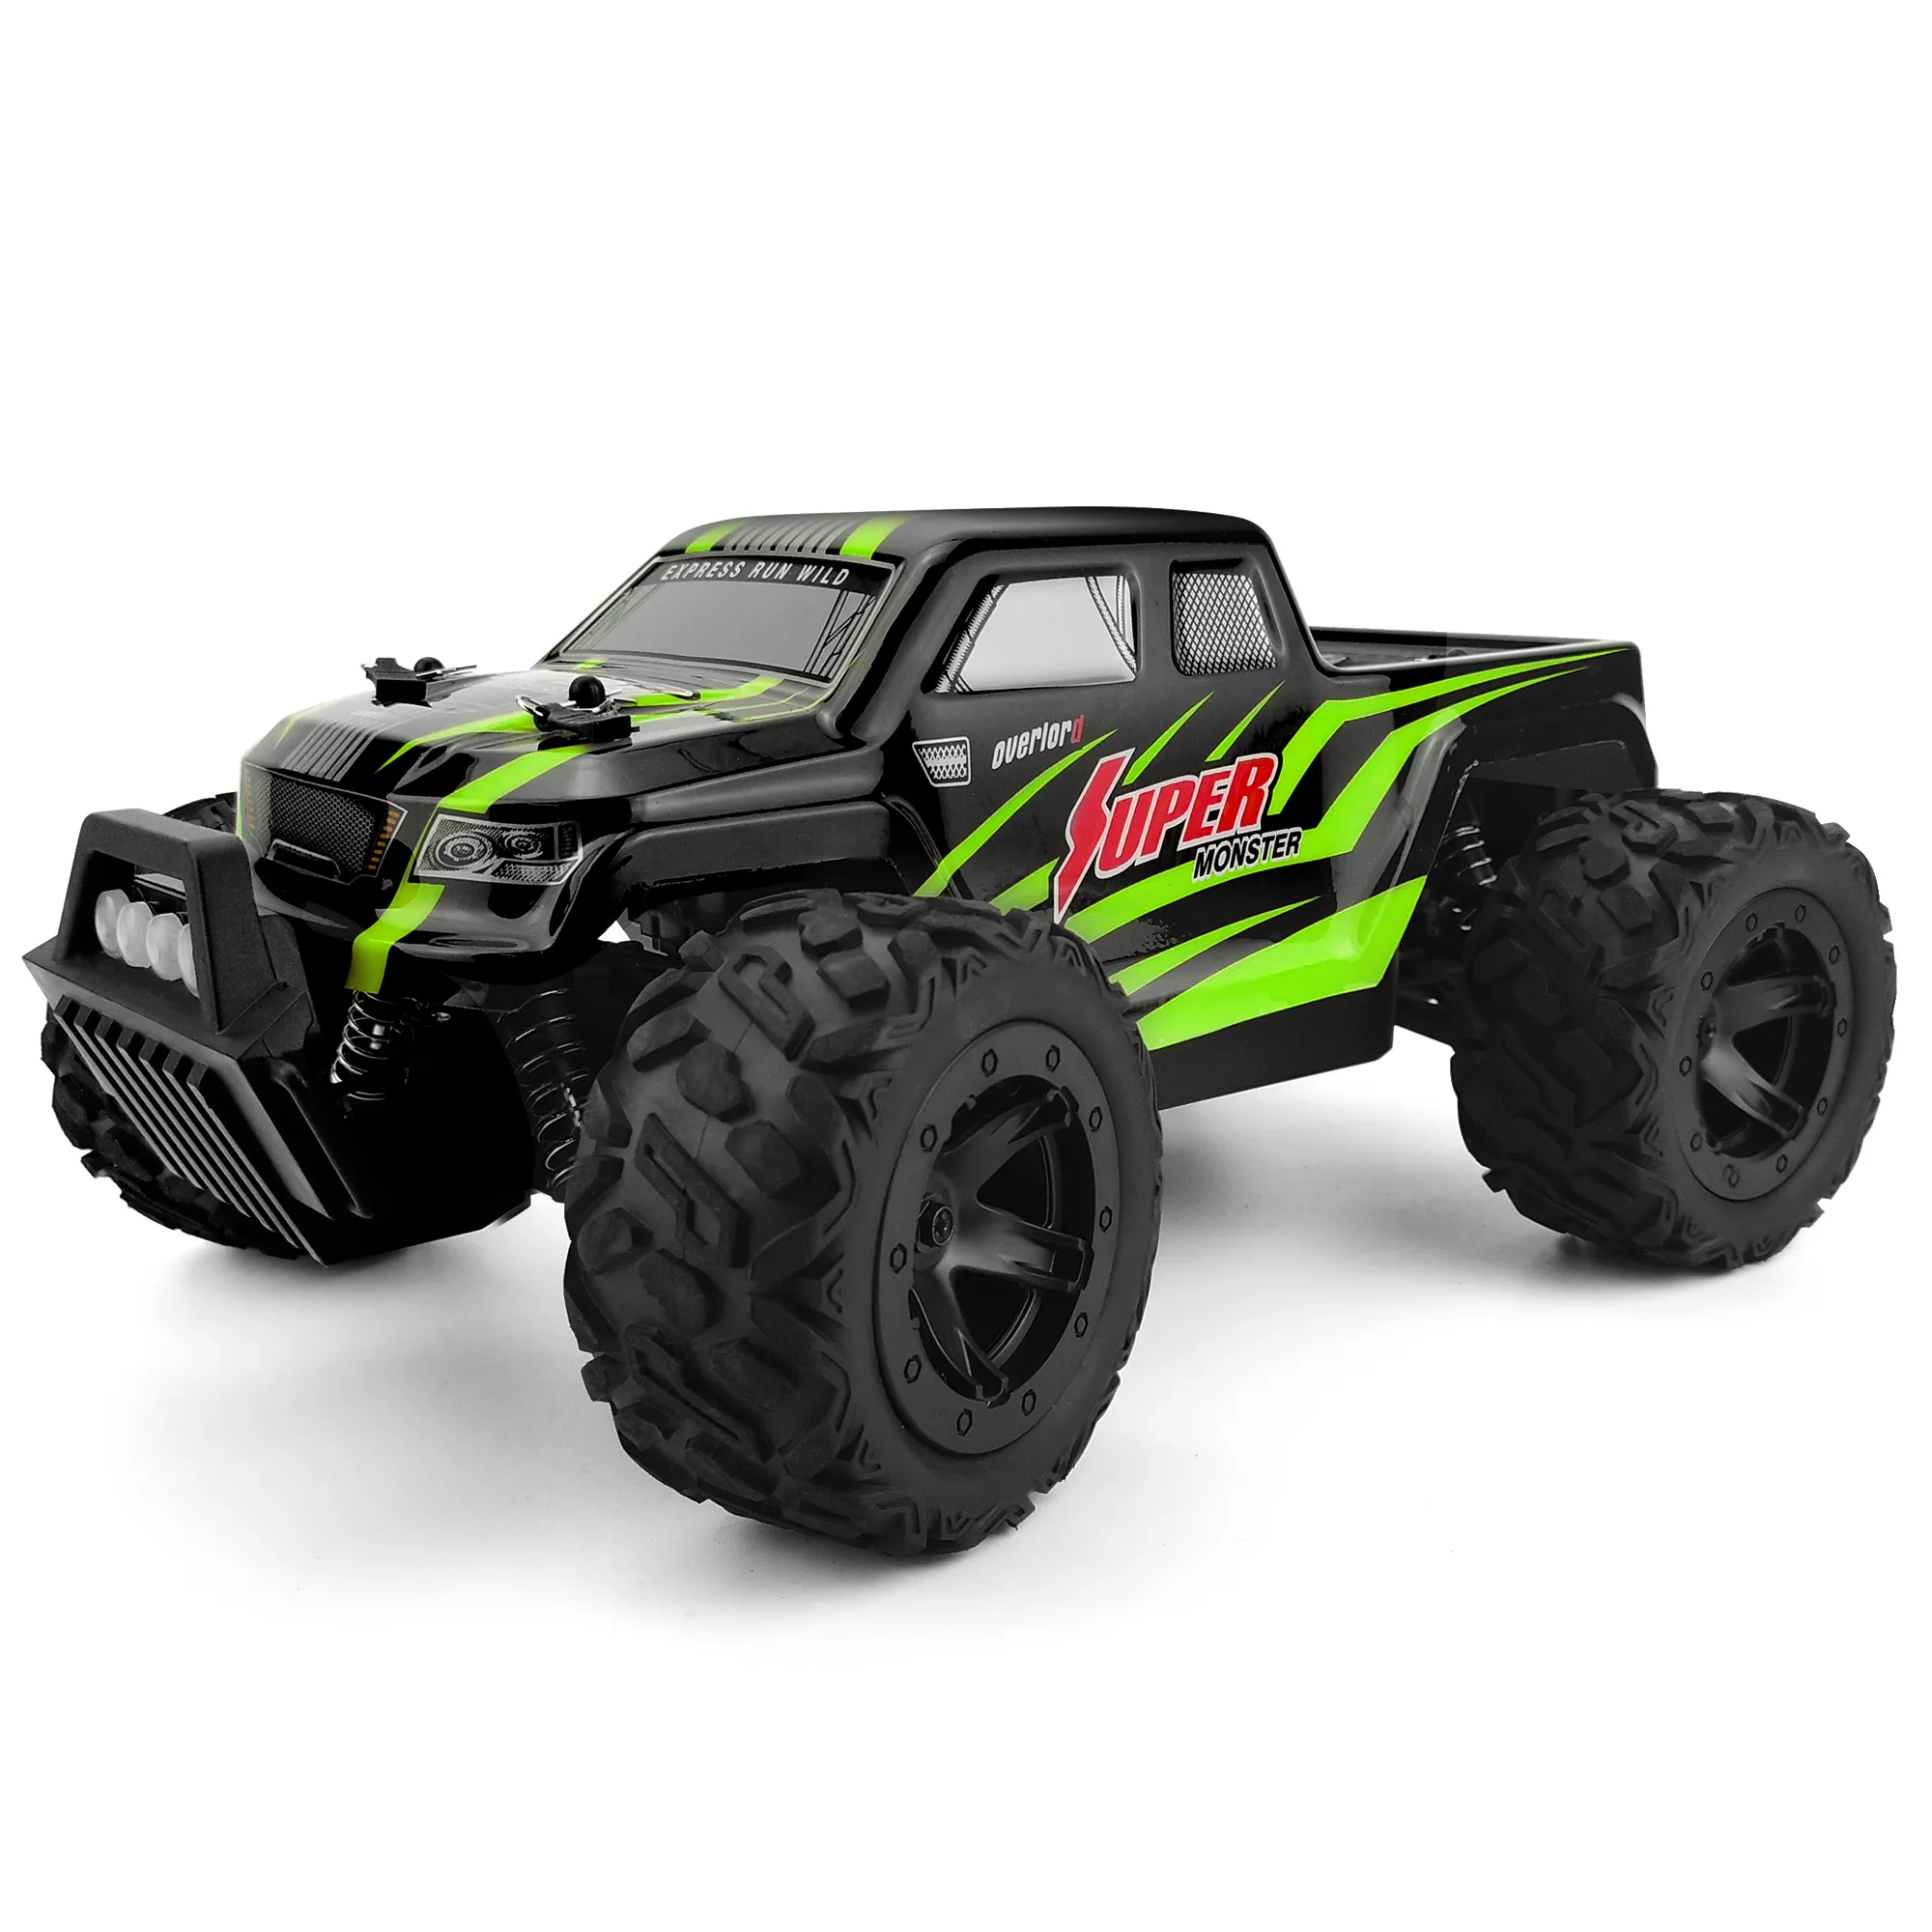 2021 Factory Price Hot Sale RC Hobby High Speed 4x4 Off Road Monster Truck Drift Car Toys 1:14 Radio Control Racing Car